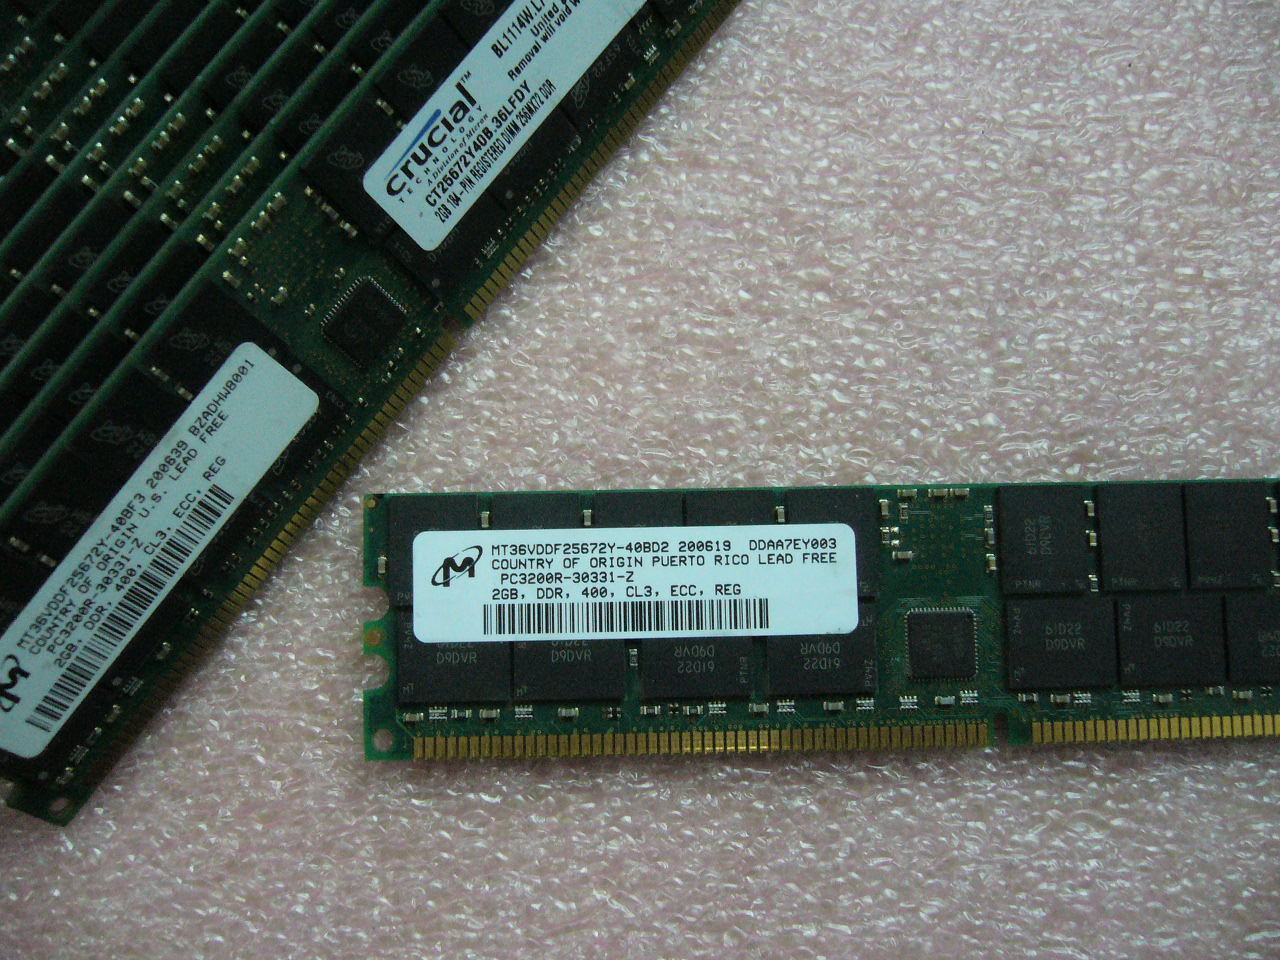 1x 2GB Micro Technology DDR PC-3200R 400Mhz CL3 ECC Registered Server memory - Click Image to Close